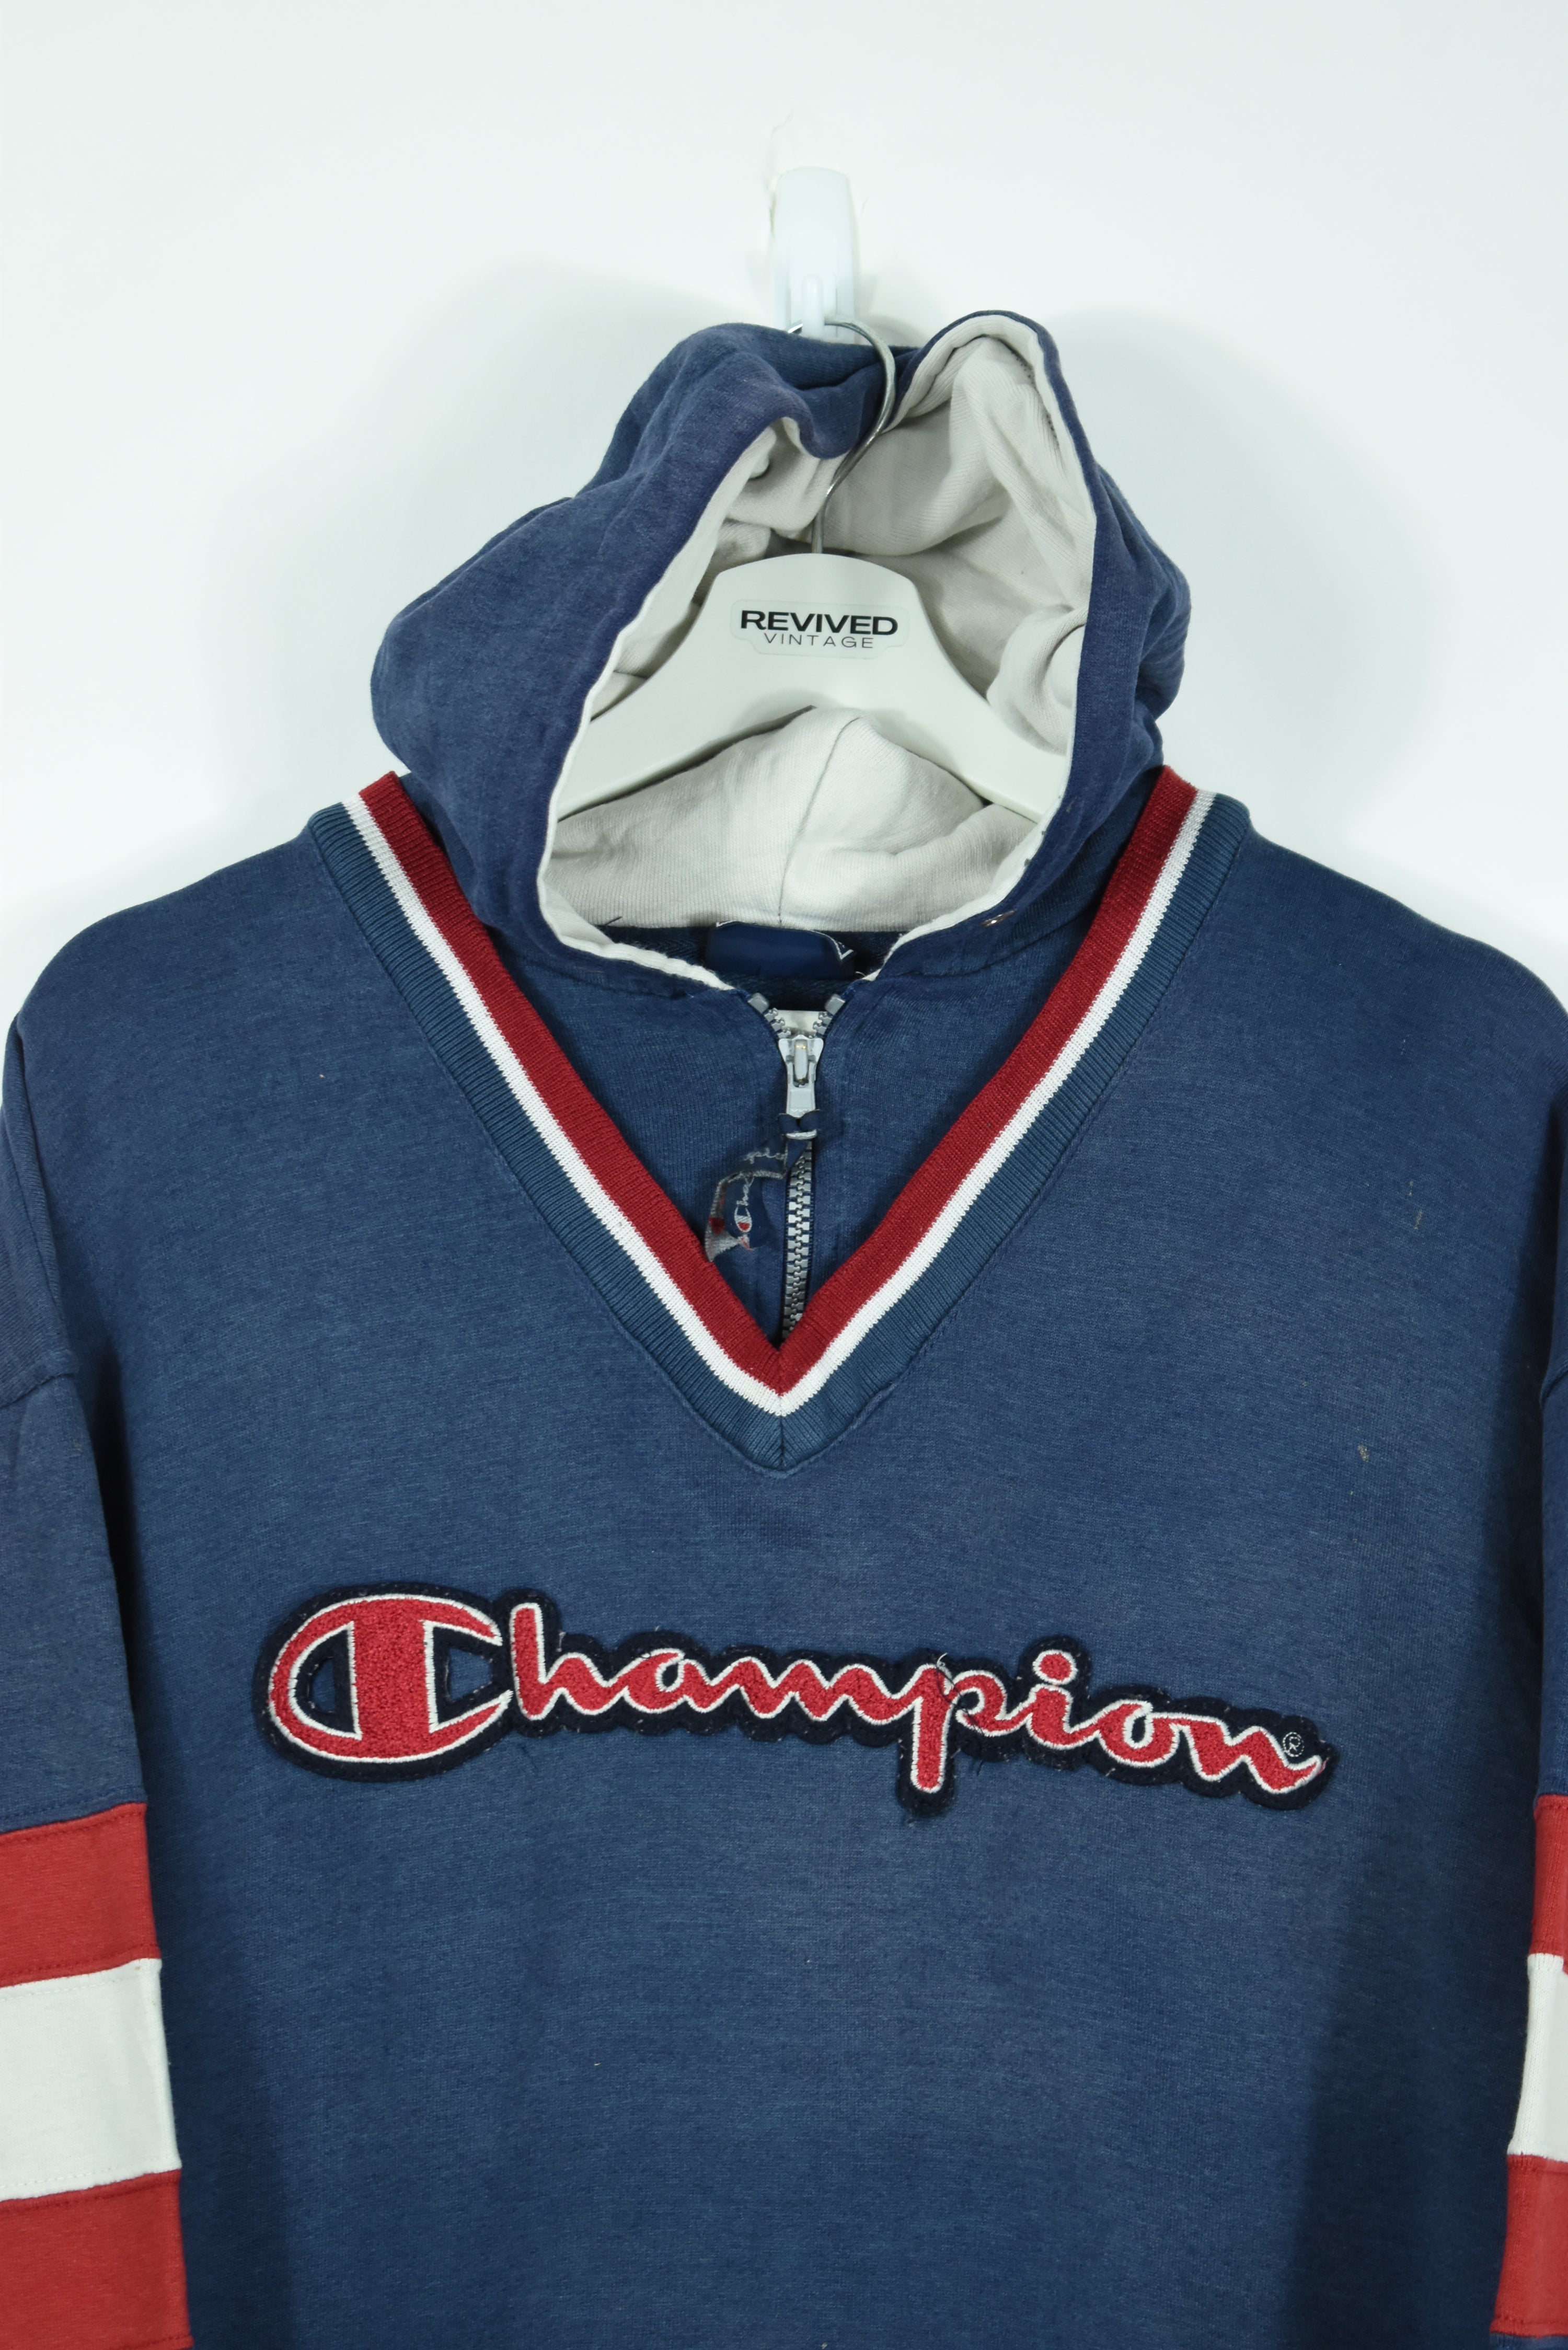 Vintage Champion Embroidery Spellout Hoodie Medium